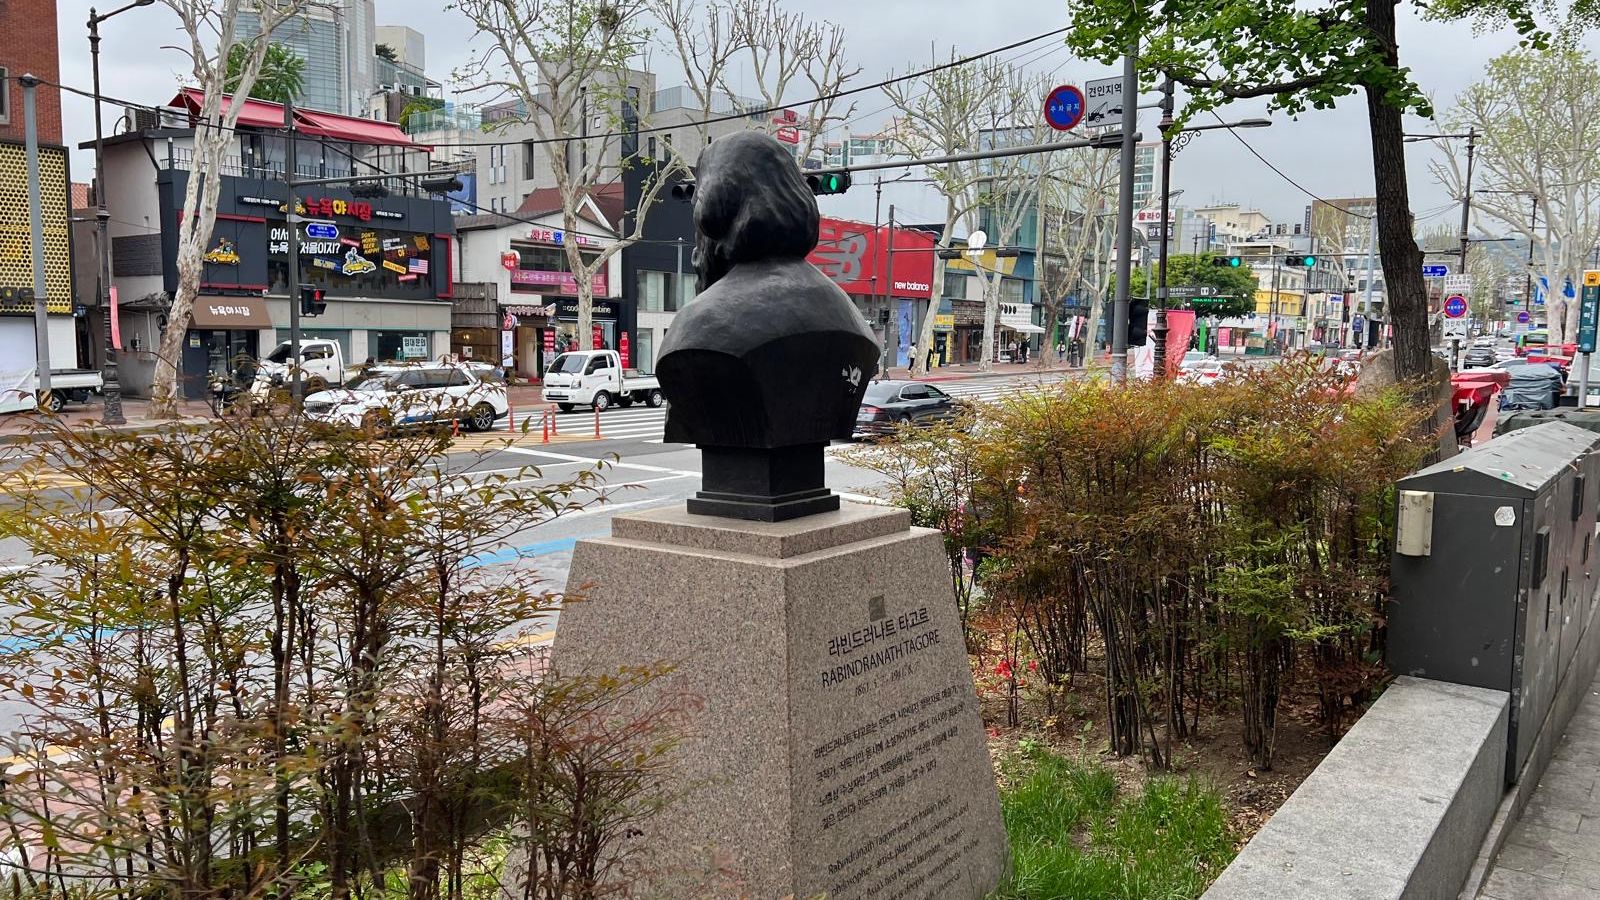  A bust of Rabindranath Tagore which was established in Jongno district, Seoul, South Korea in 2011,